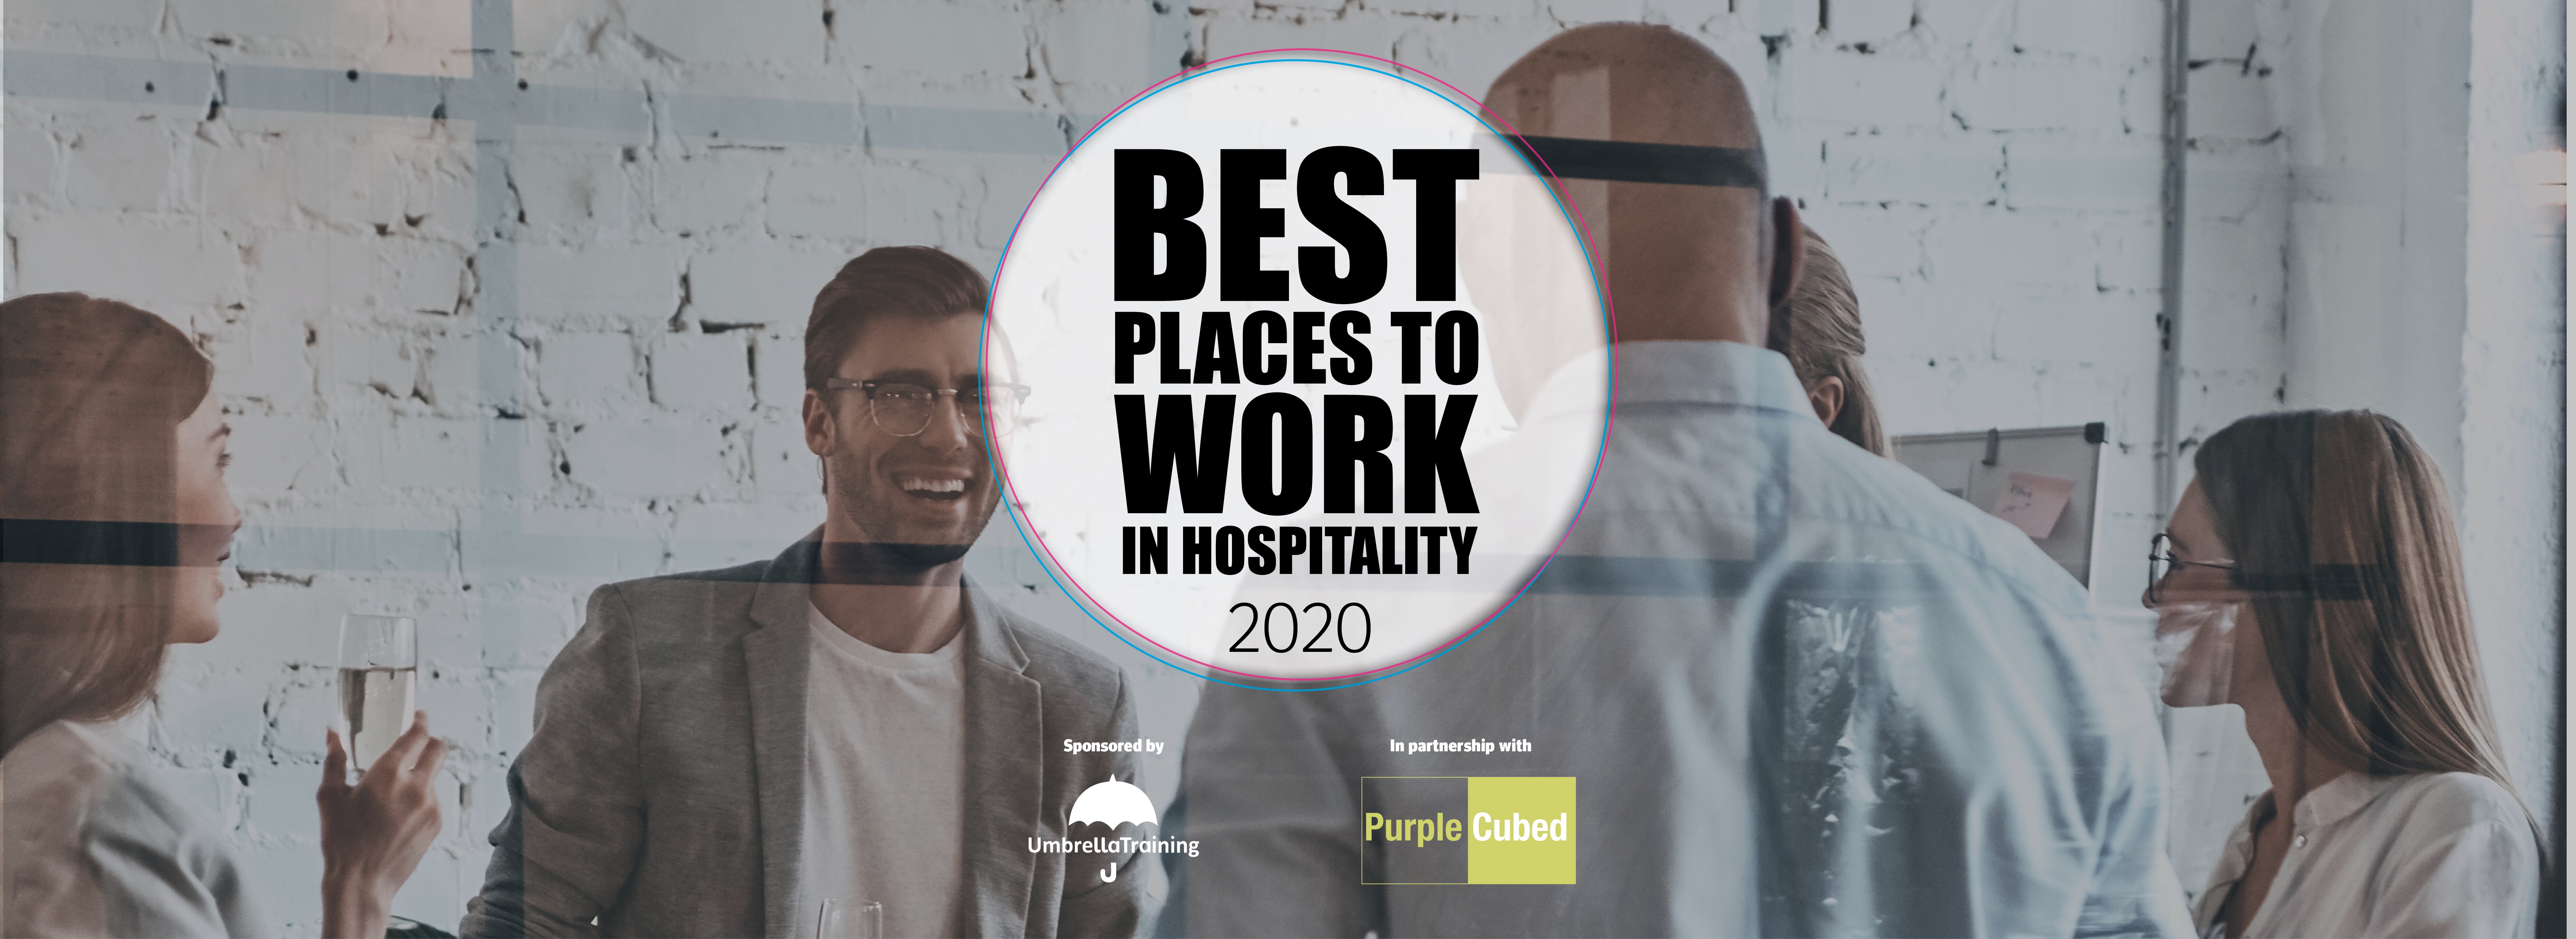 The Best Places to Work in Hospitality 2020